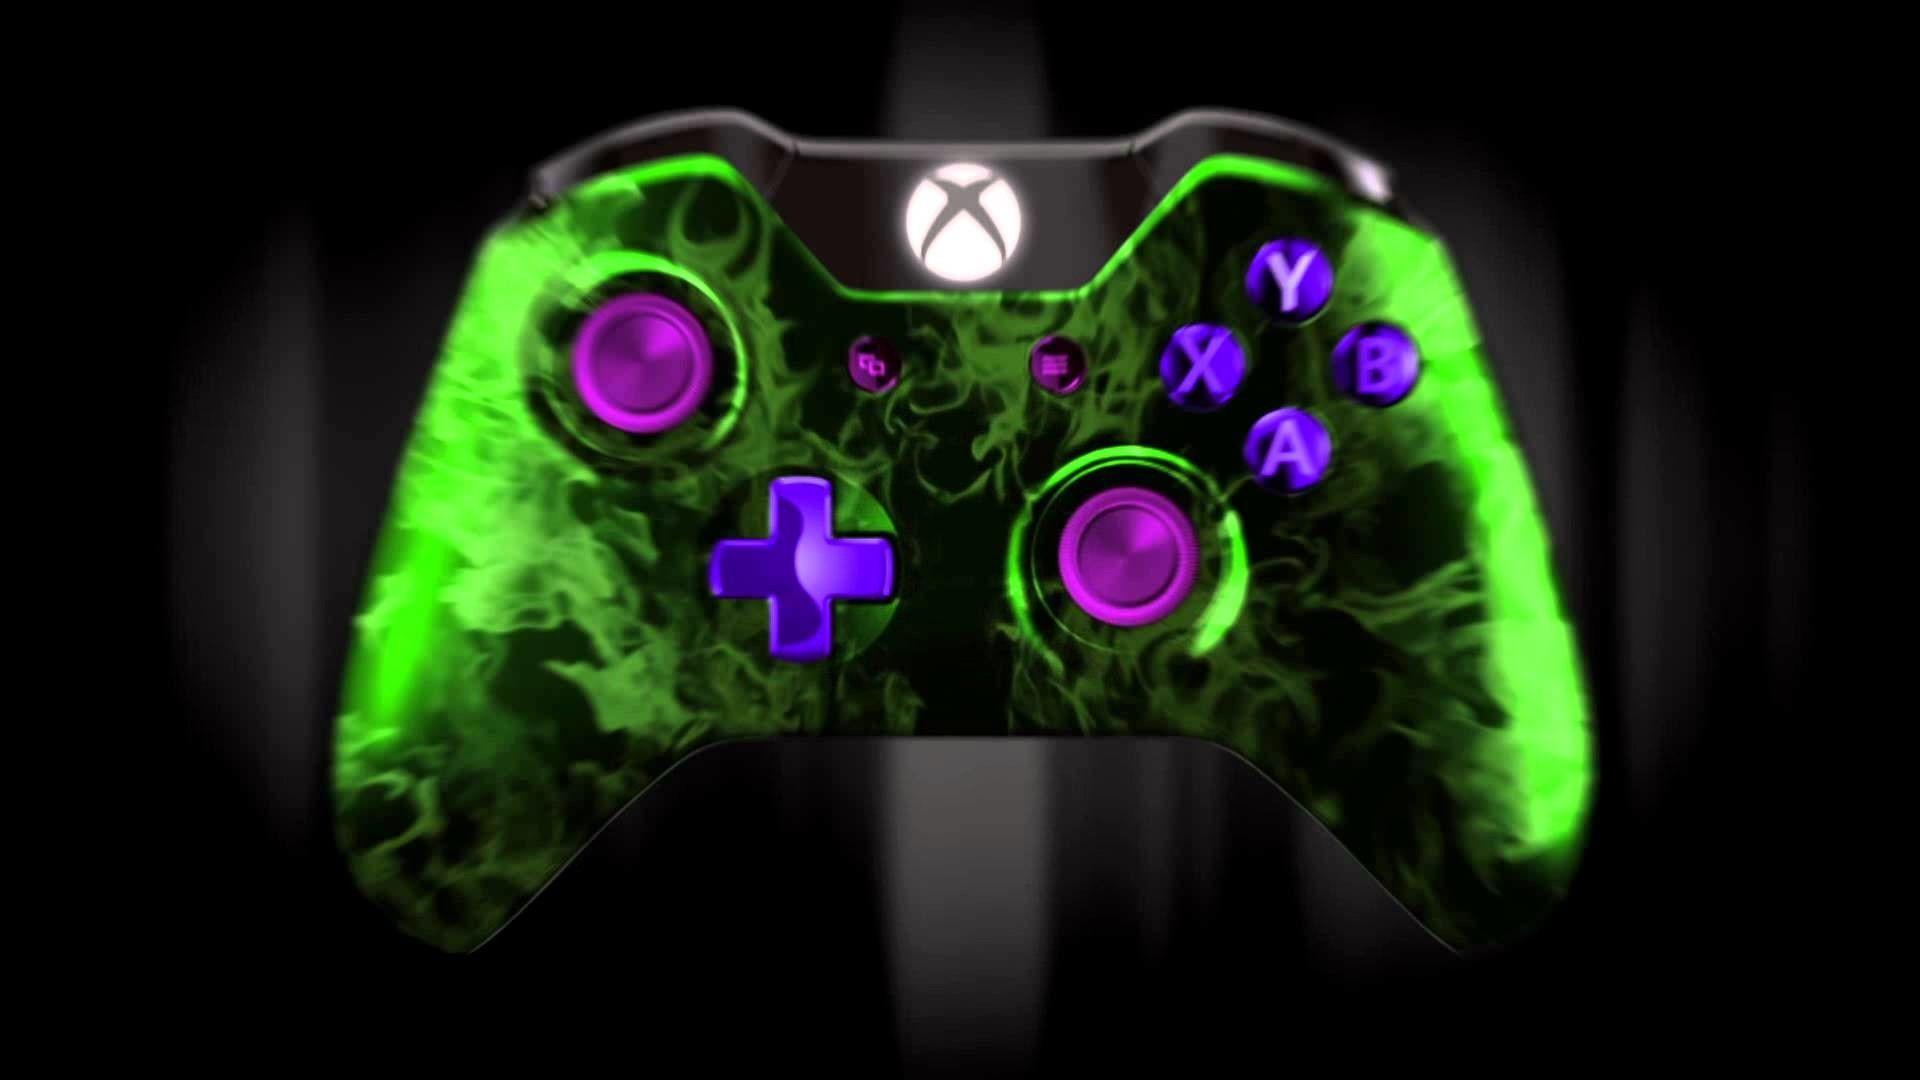 Xbox Controller HD Wallpapers  Top Free Xbox Controller HD Backgrounds   WallpaperAccess